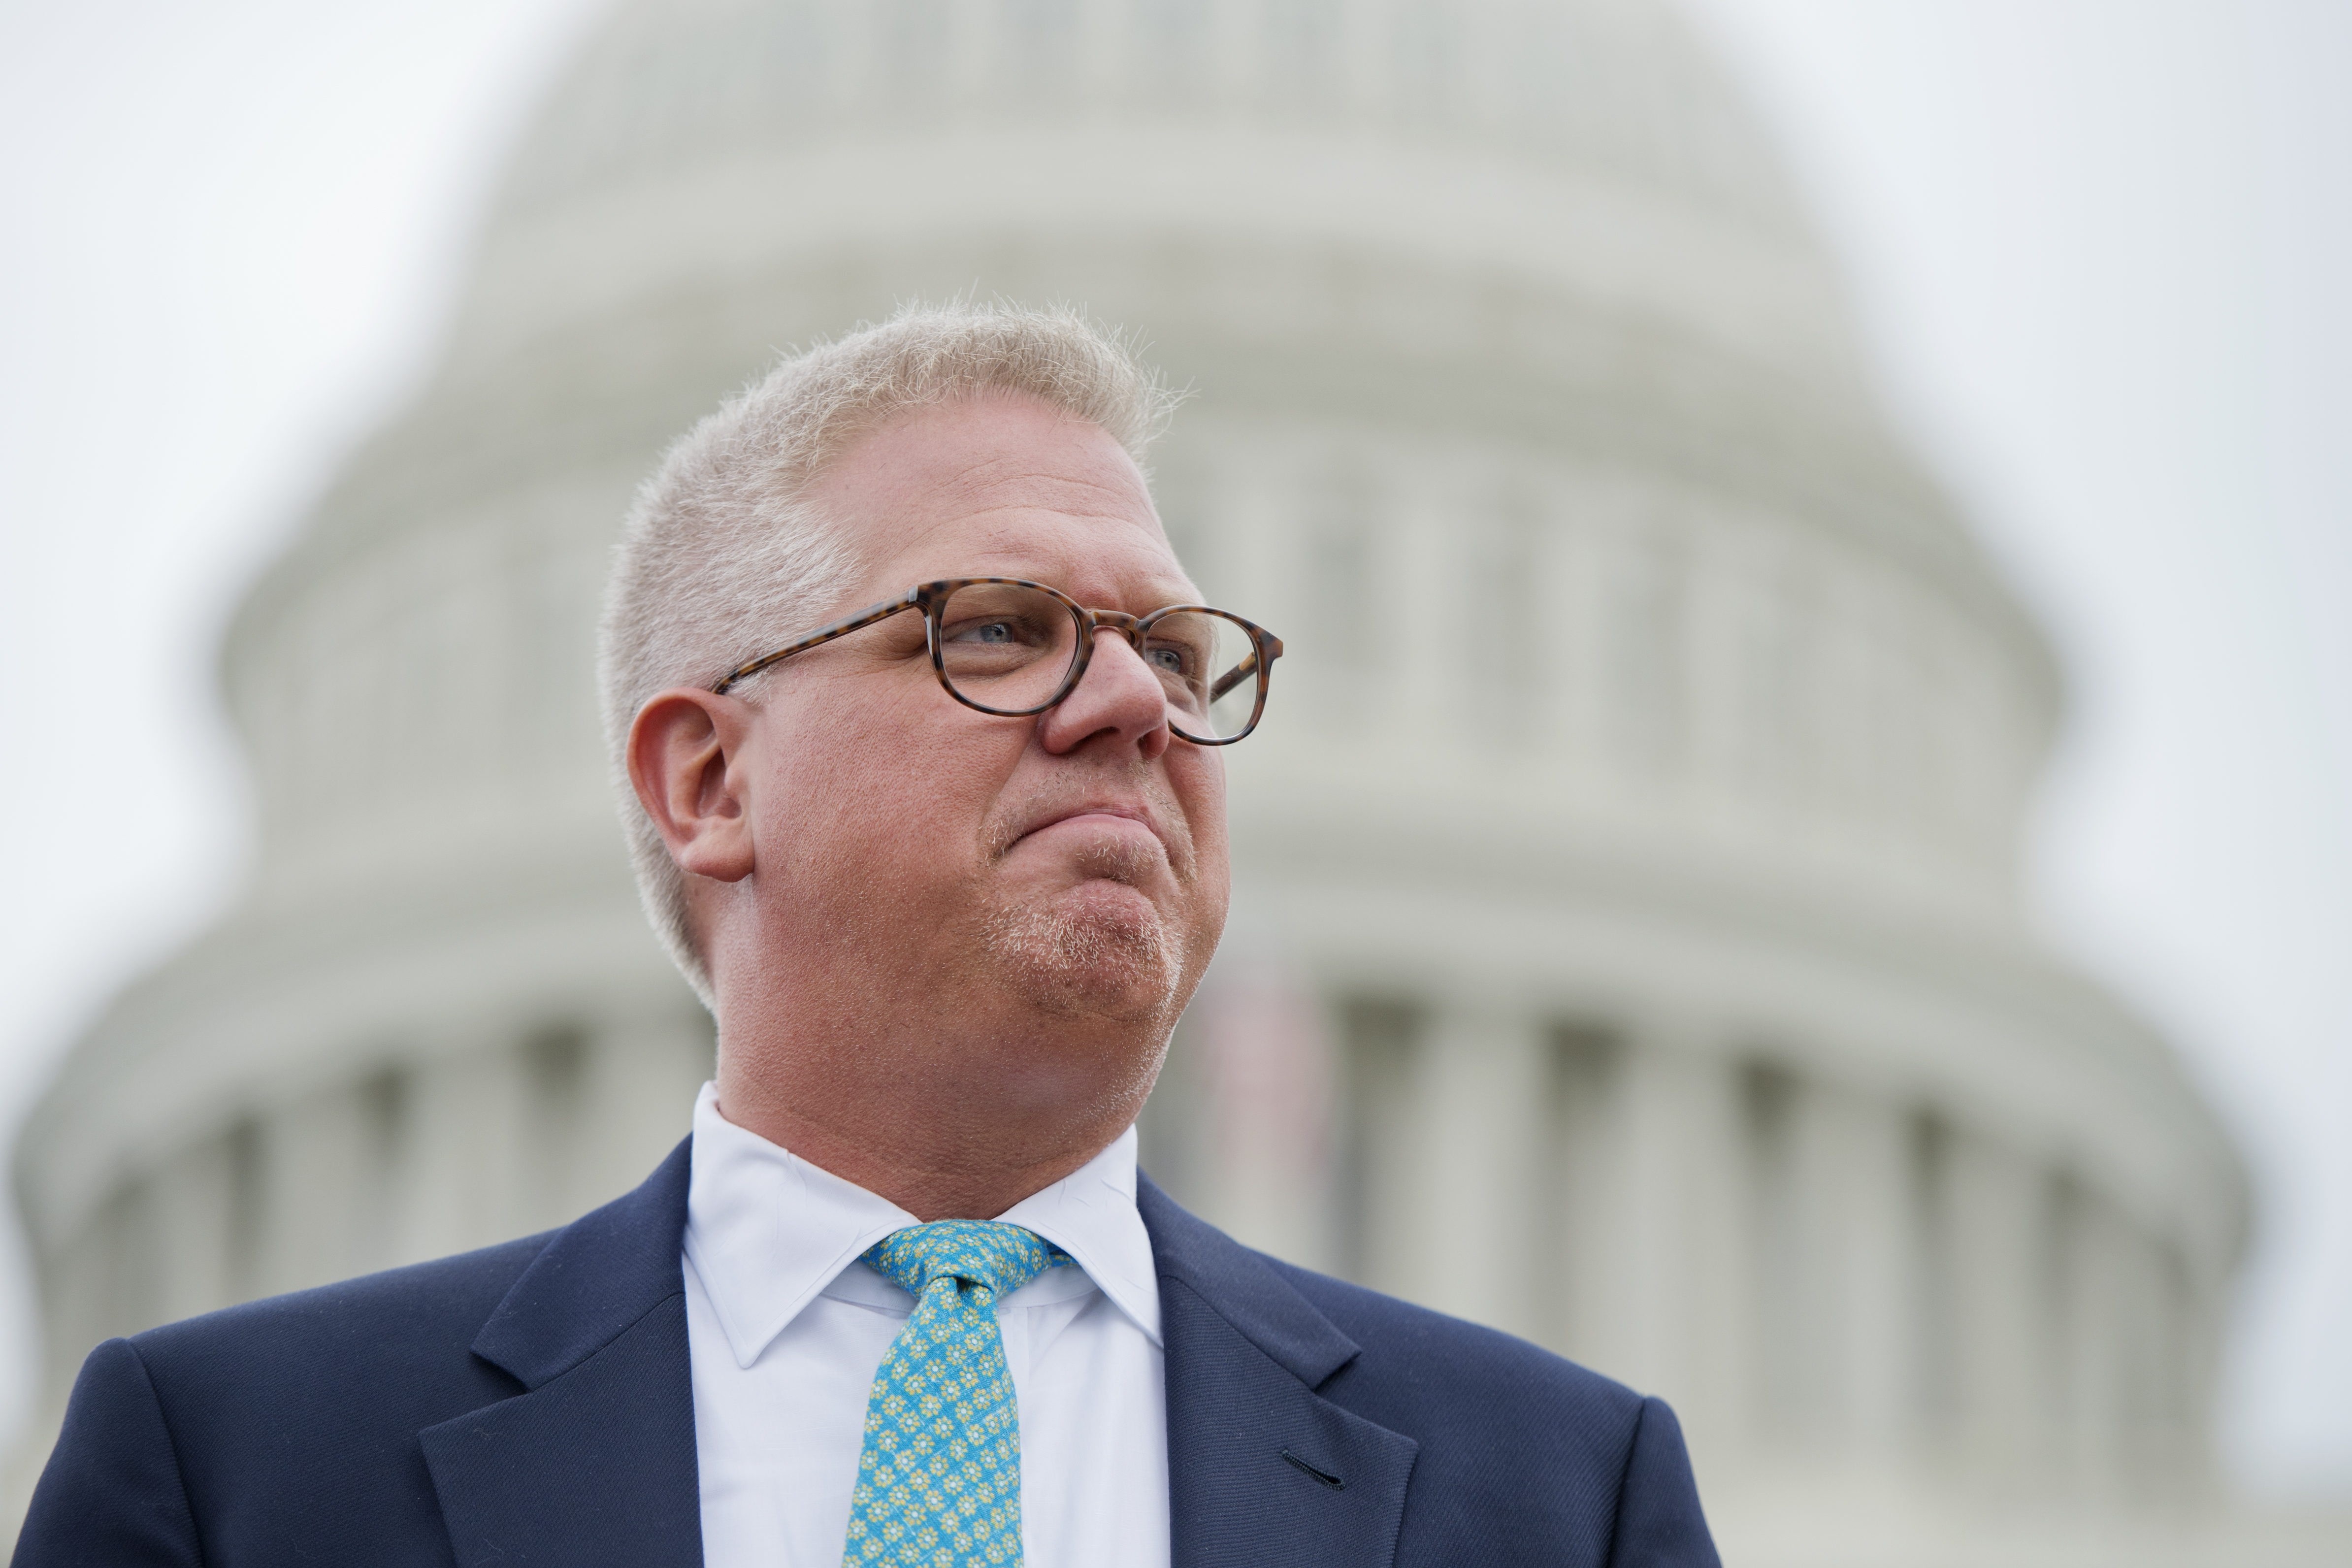 Conservative talk show host Glenn Beck attends a Tea Party Patriots rally on June 19, 2013 in Washington, D.C. (Tom Williams—CQ-Roll Call, Inc.)